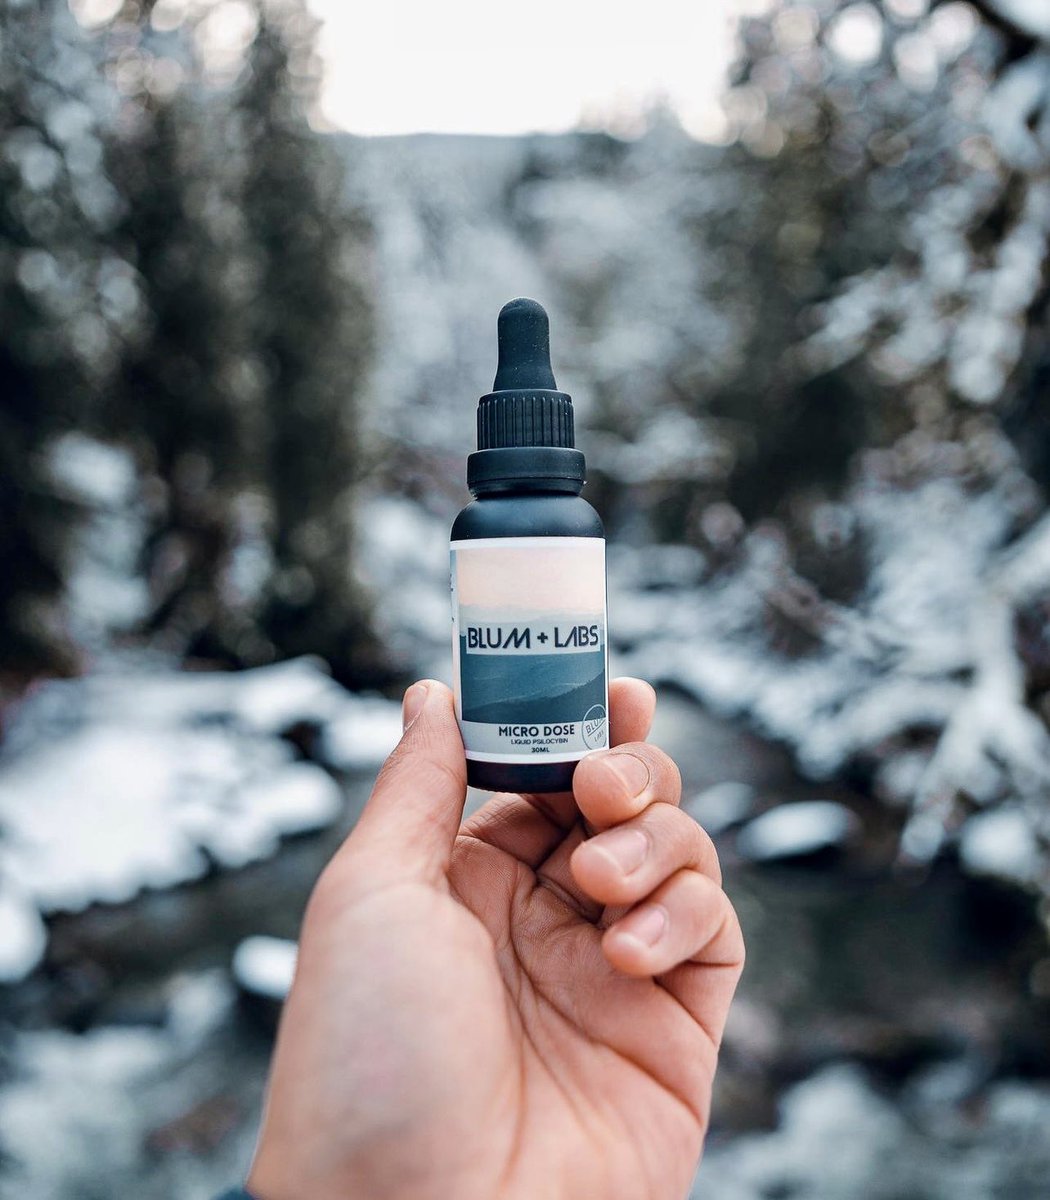 As the weather gets colder, microdosing can be a great way to boost your mood and focus.
It's like a cosy mental blanket!

#Mushrooms #Outdoors #Winter #MentalHealth
#SeasonalDepression #BrainHealth #PlantMedicine
#Positivitv #PositivitvIsKey #Snow
#NaturalAlternative #Mycology